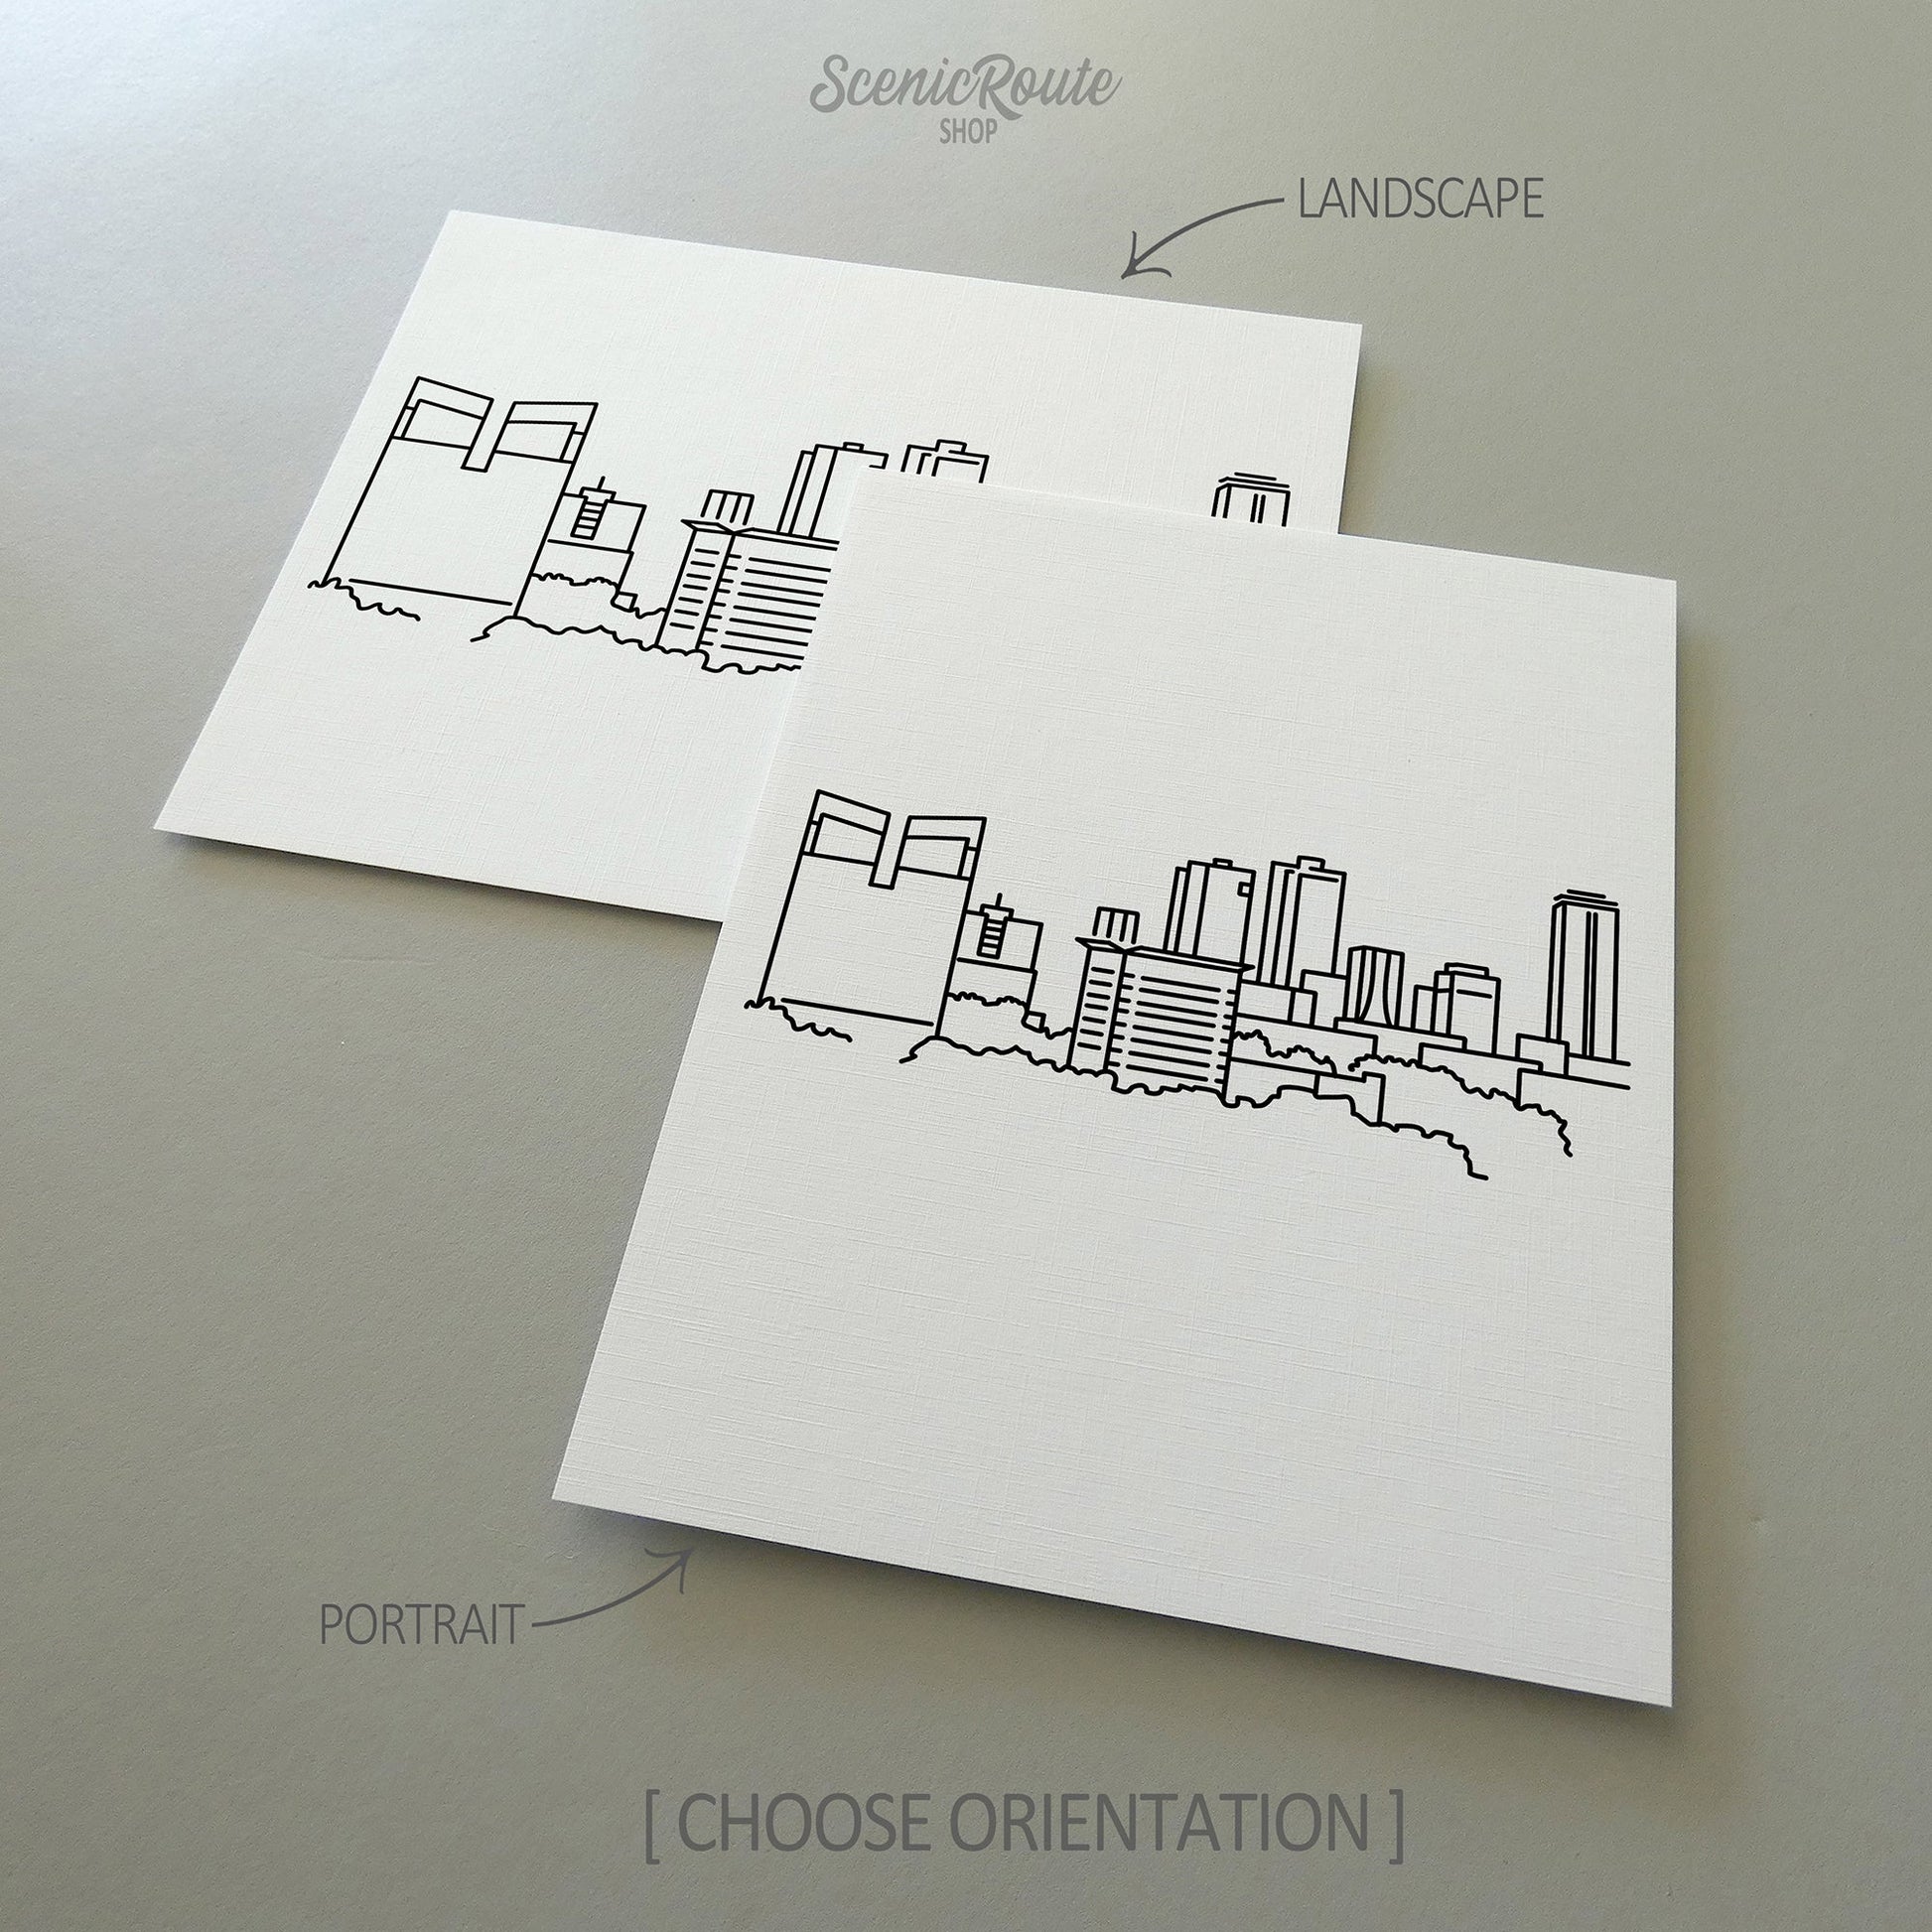 Two line art drawings of the Fort Worth Skyline on white linen paper with a gray background.  The pieces are shown in portrait and landscape orientation for the available art print options.